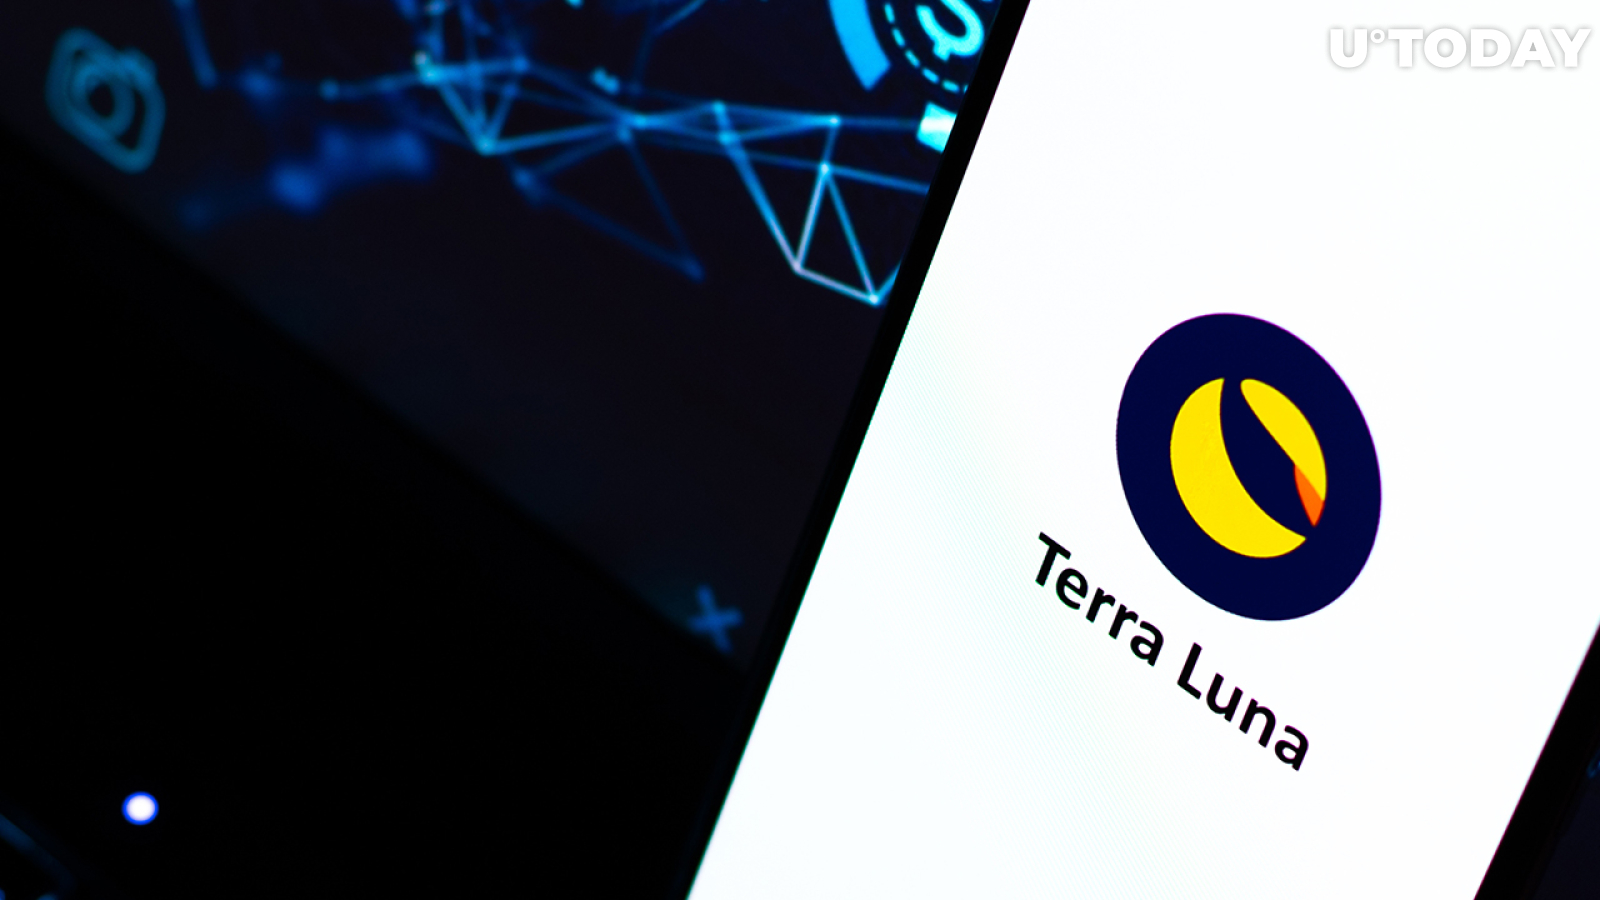 110,000 LUNA Bought by Top Whale as Terra Returns as Most-Purchased Asset by Whales